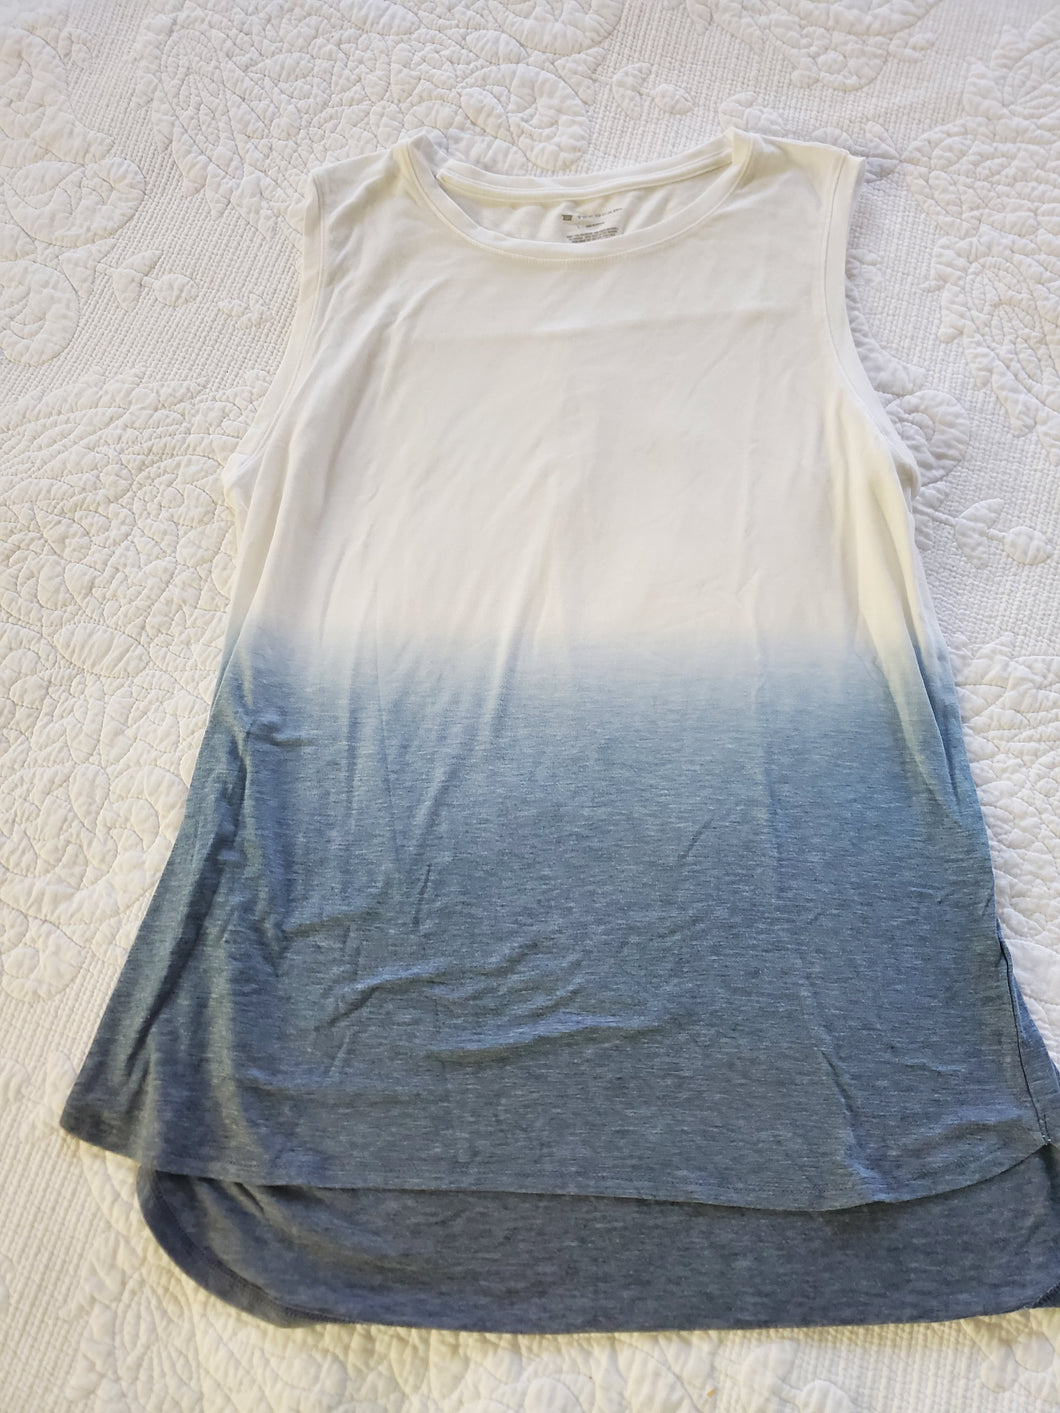 Ombre Sleeveless Top by Tek Gear Size Large NWT